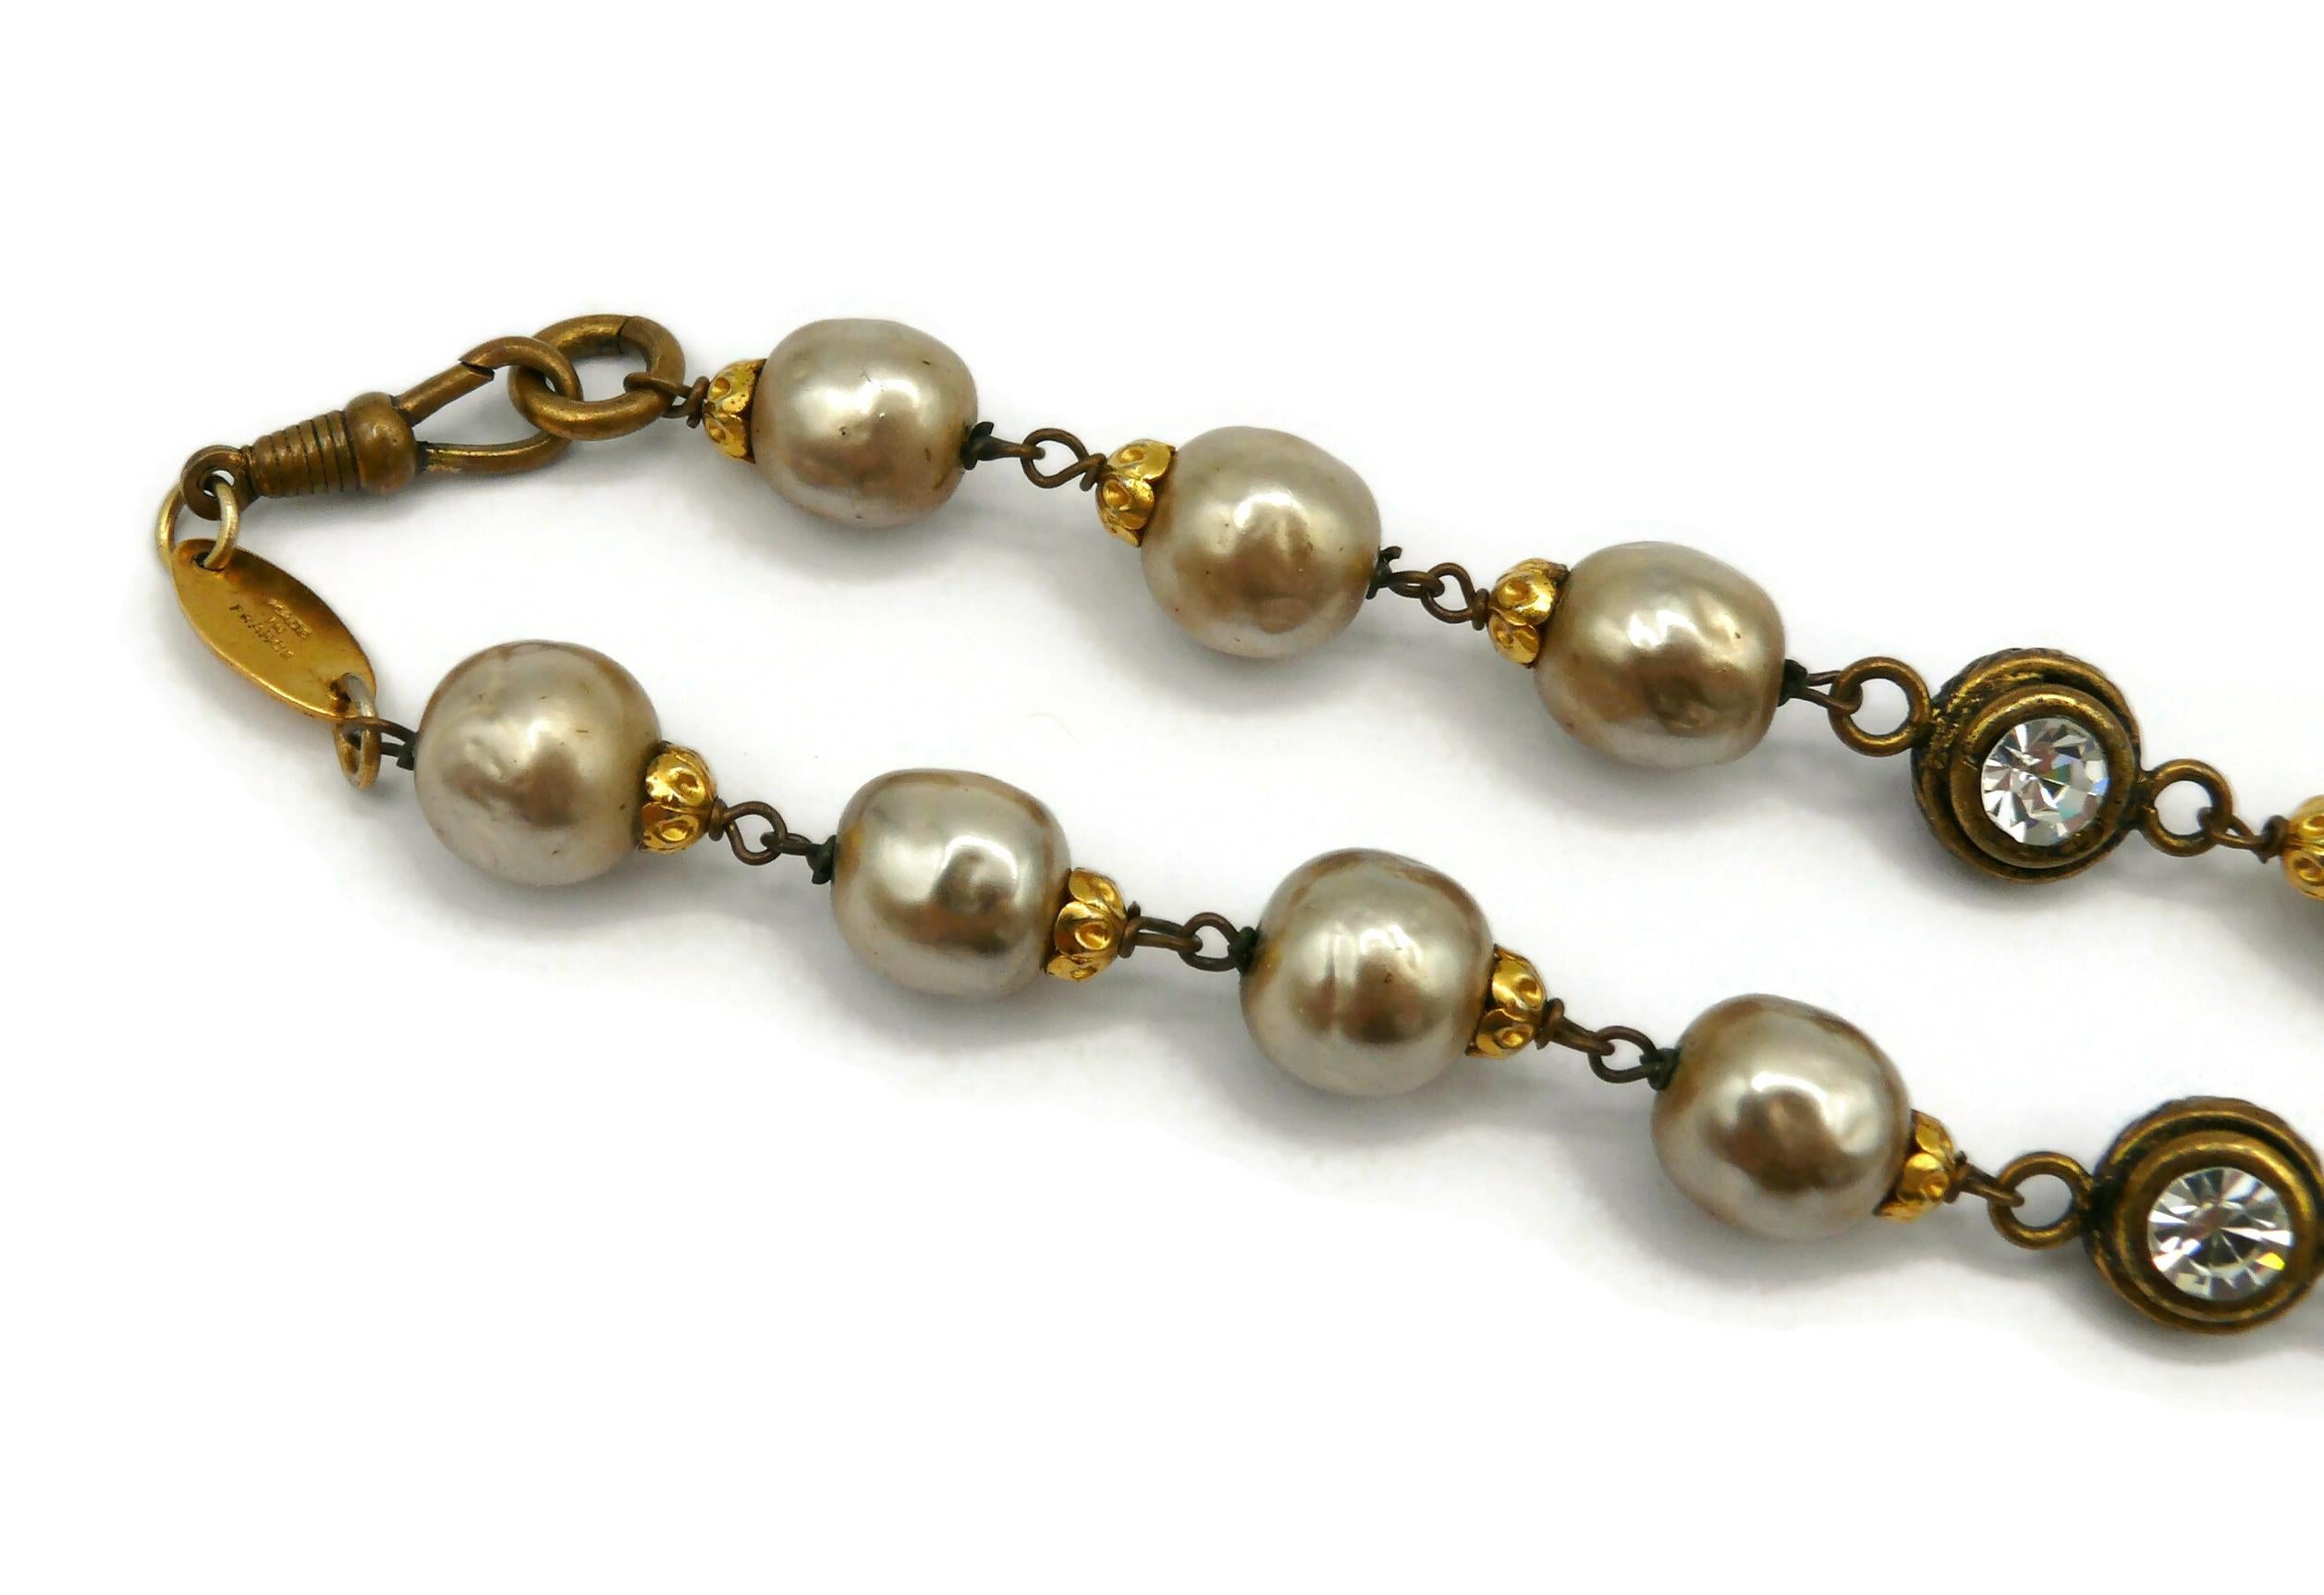 CHANEL Vintage Pearl & Crystal Sautoir Necklace, 1983 For Sale 1